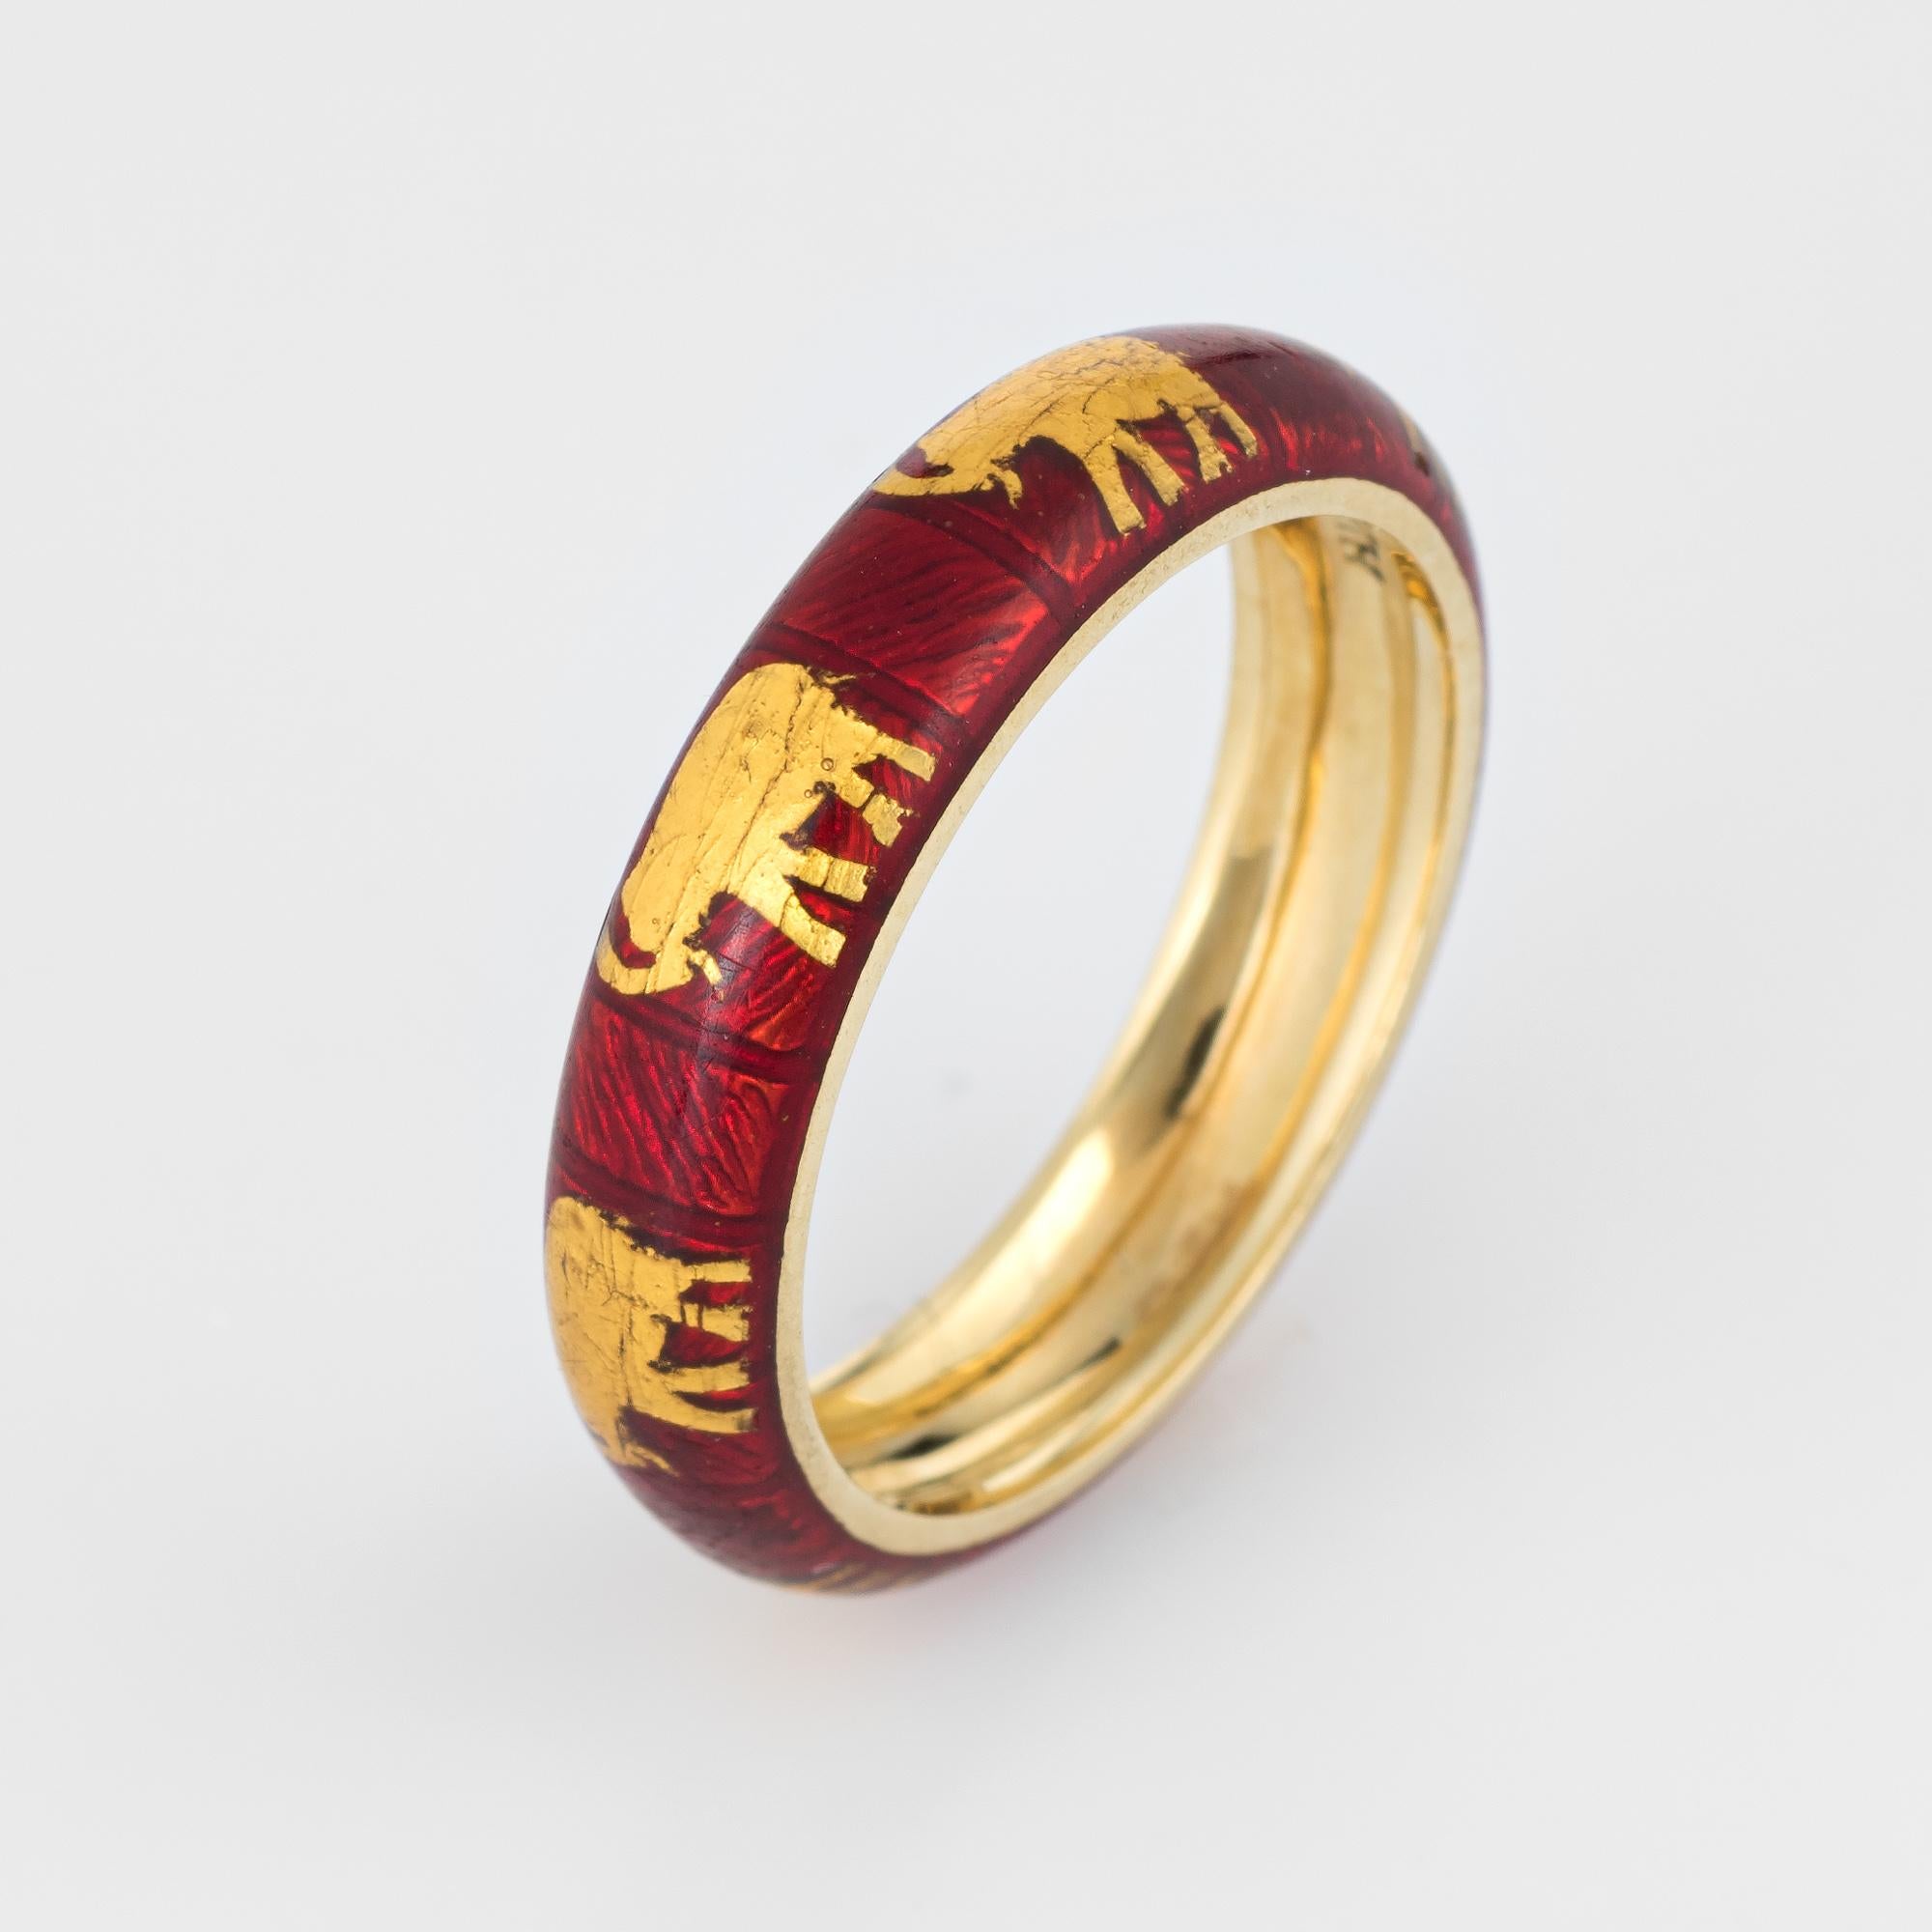 Finely detailed Hidalgo elephant ring crafted in 18 karat yellow gold. 

The elephants are rendered in gold against a red enamel base around the entire band.

The ring is in excellent condition. 

Particulars:

Weight: 4.3 grams

Stones: N/A. 

Size